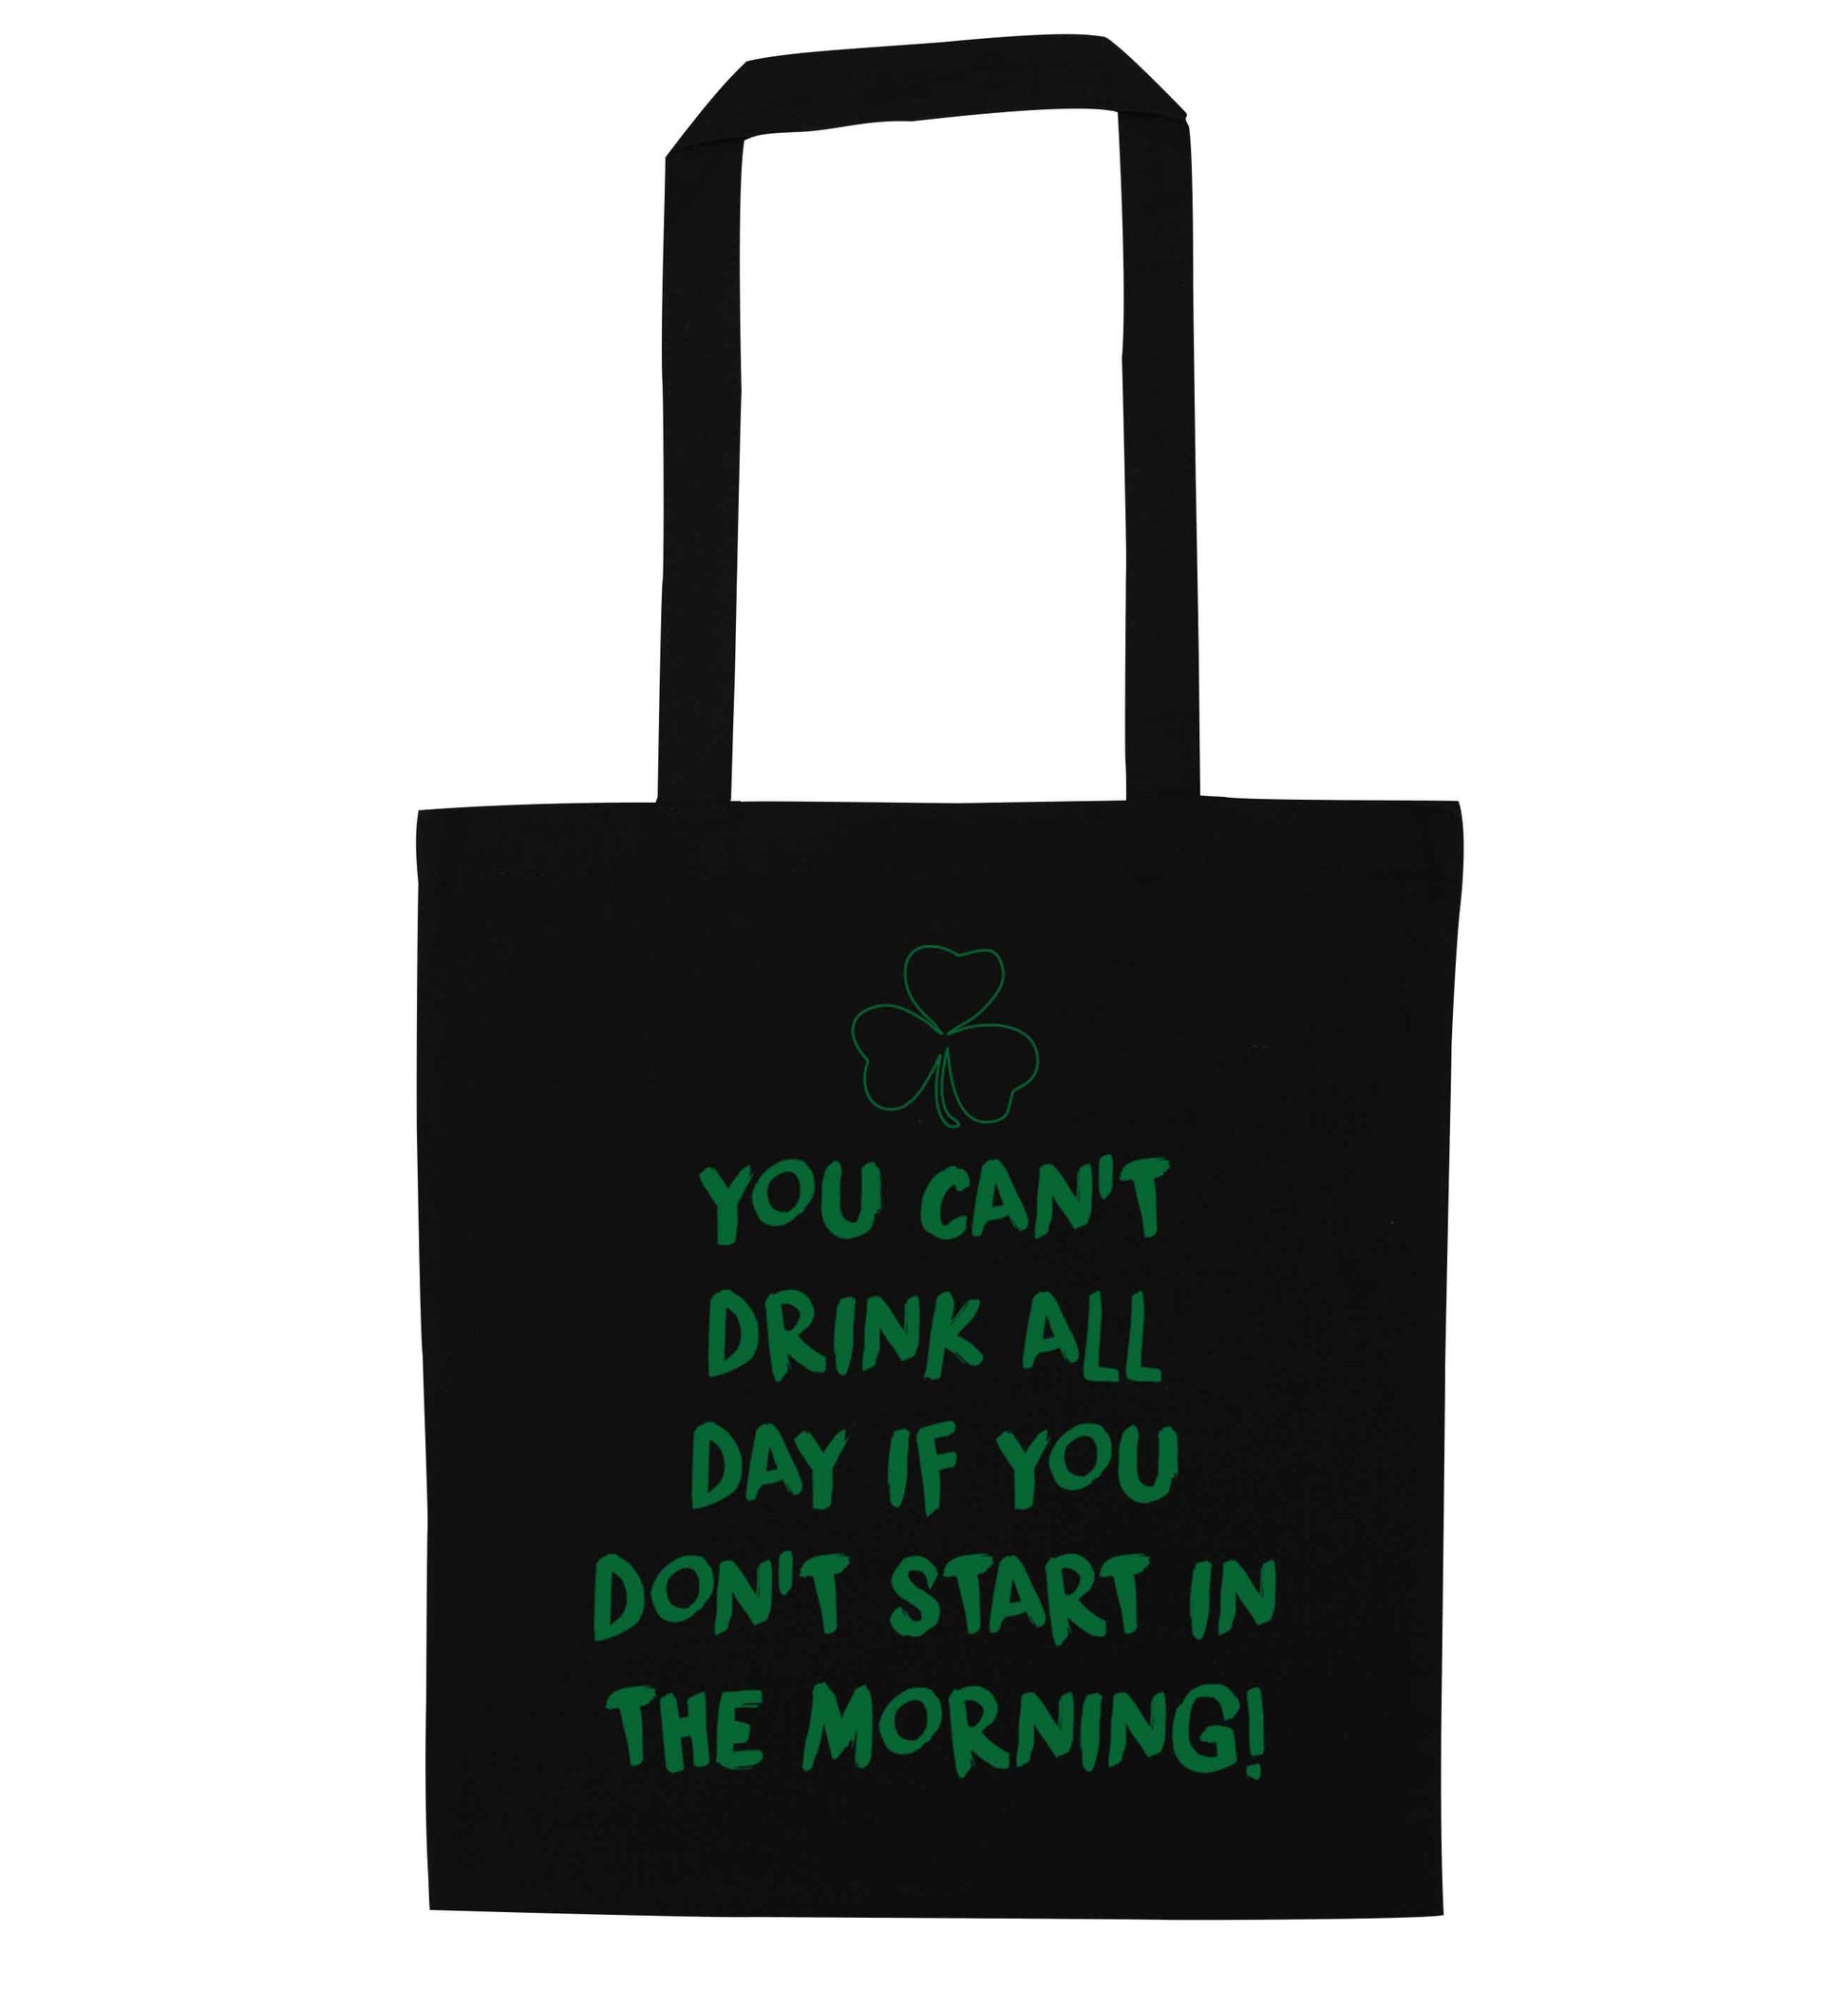 You can't drink all day if you don't start in the morning black tote bag